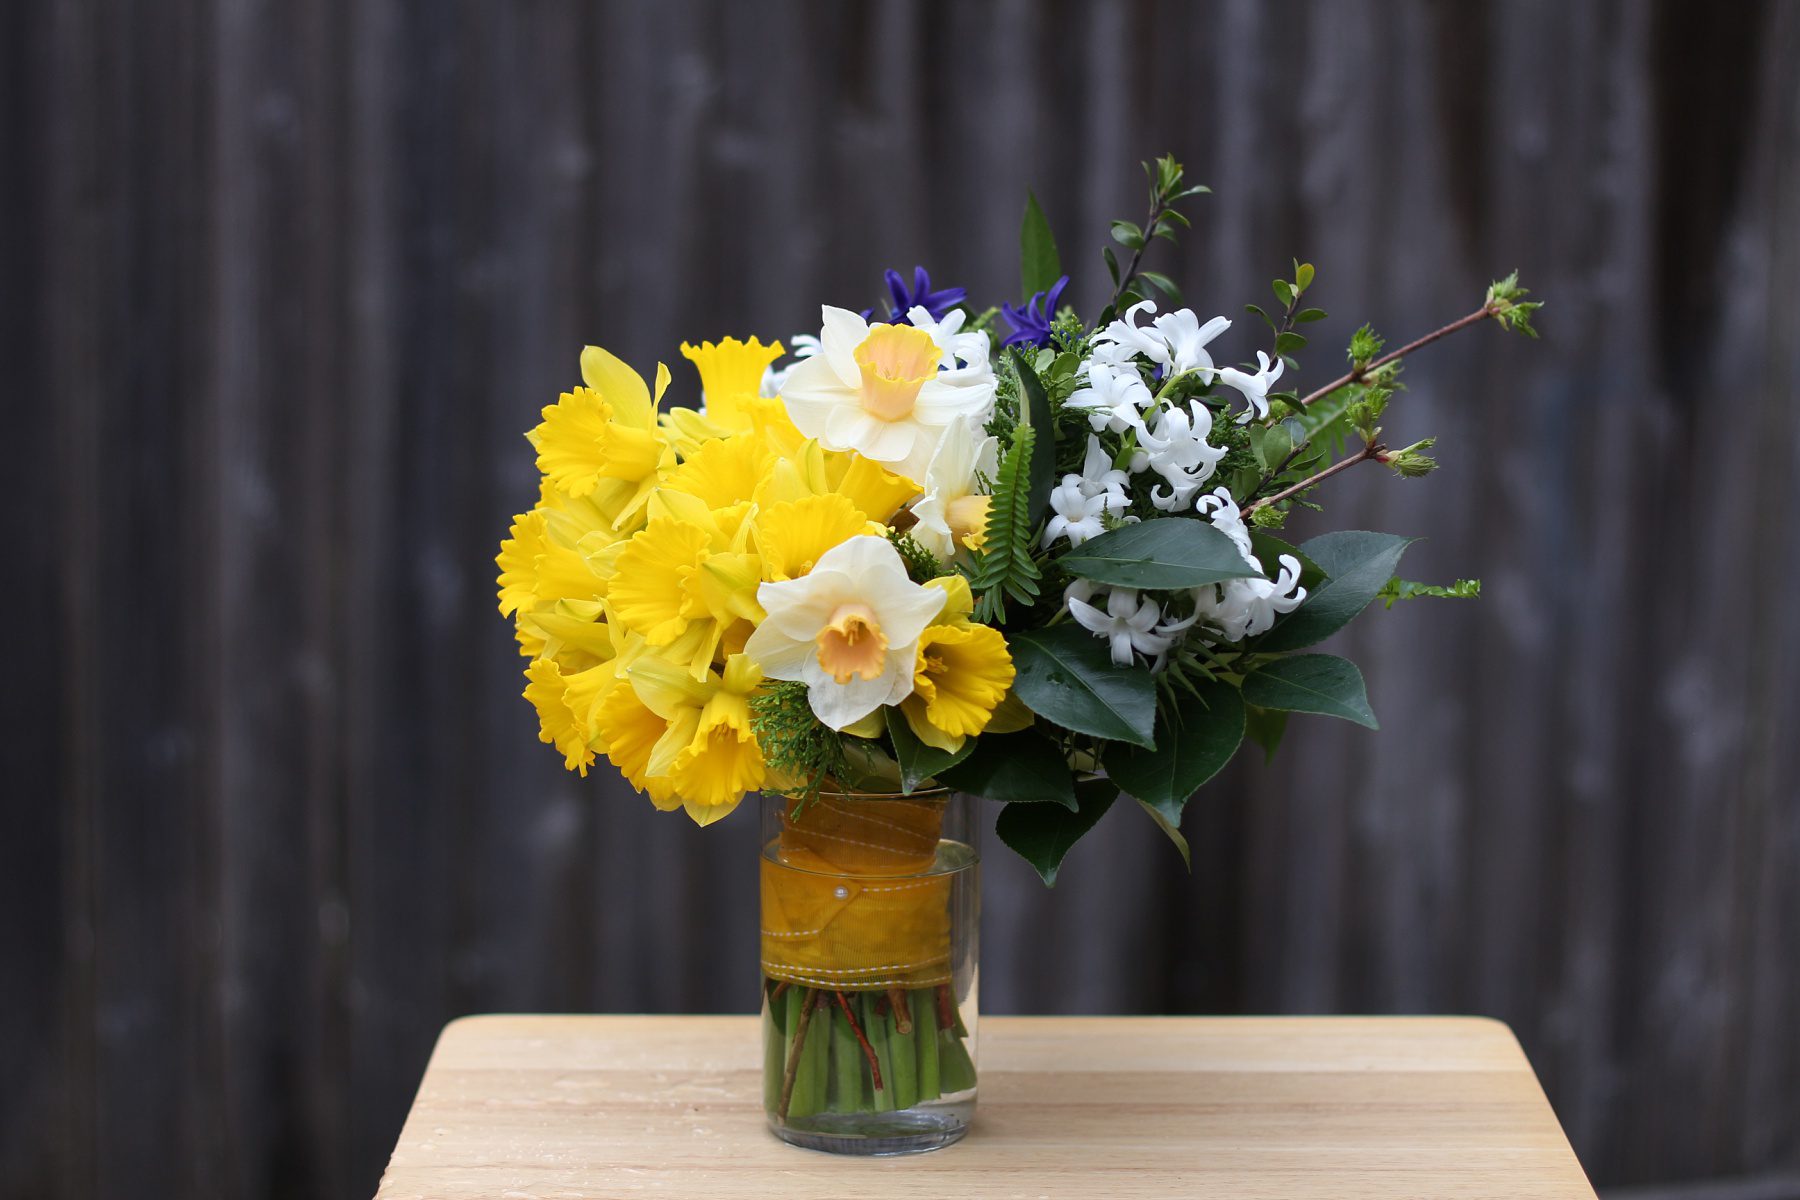 green, yellow, and white daffodil bouquet